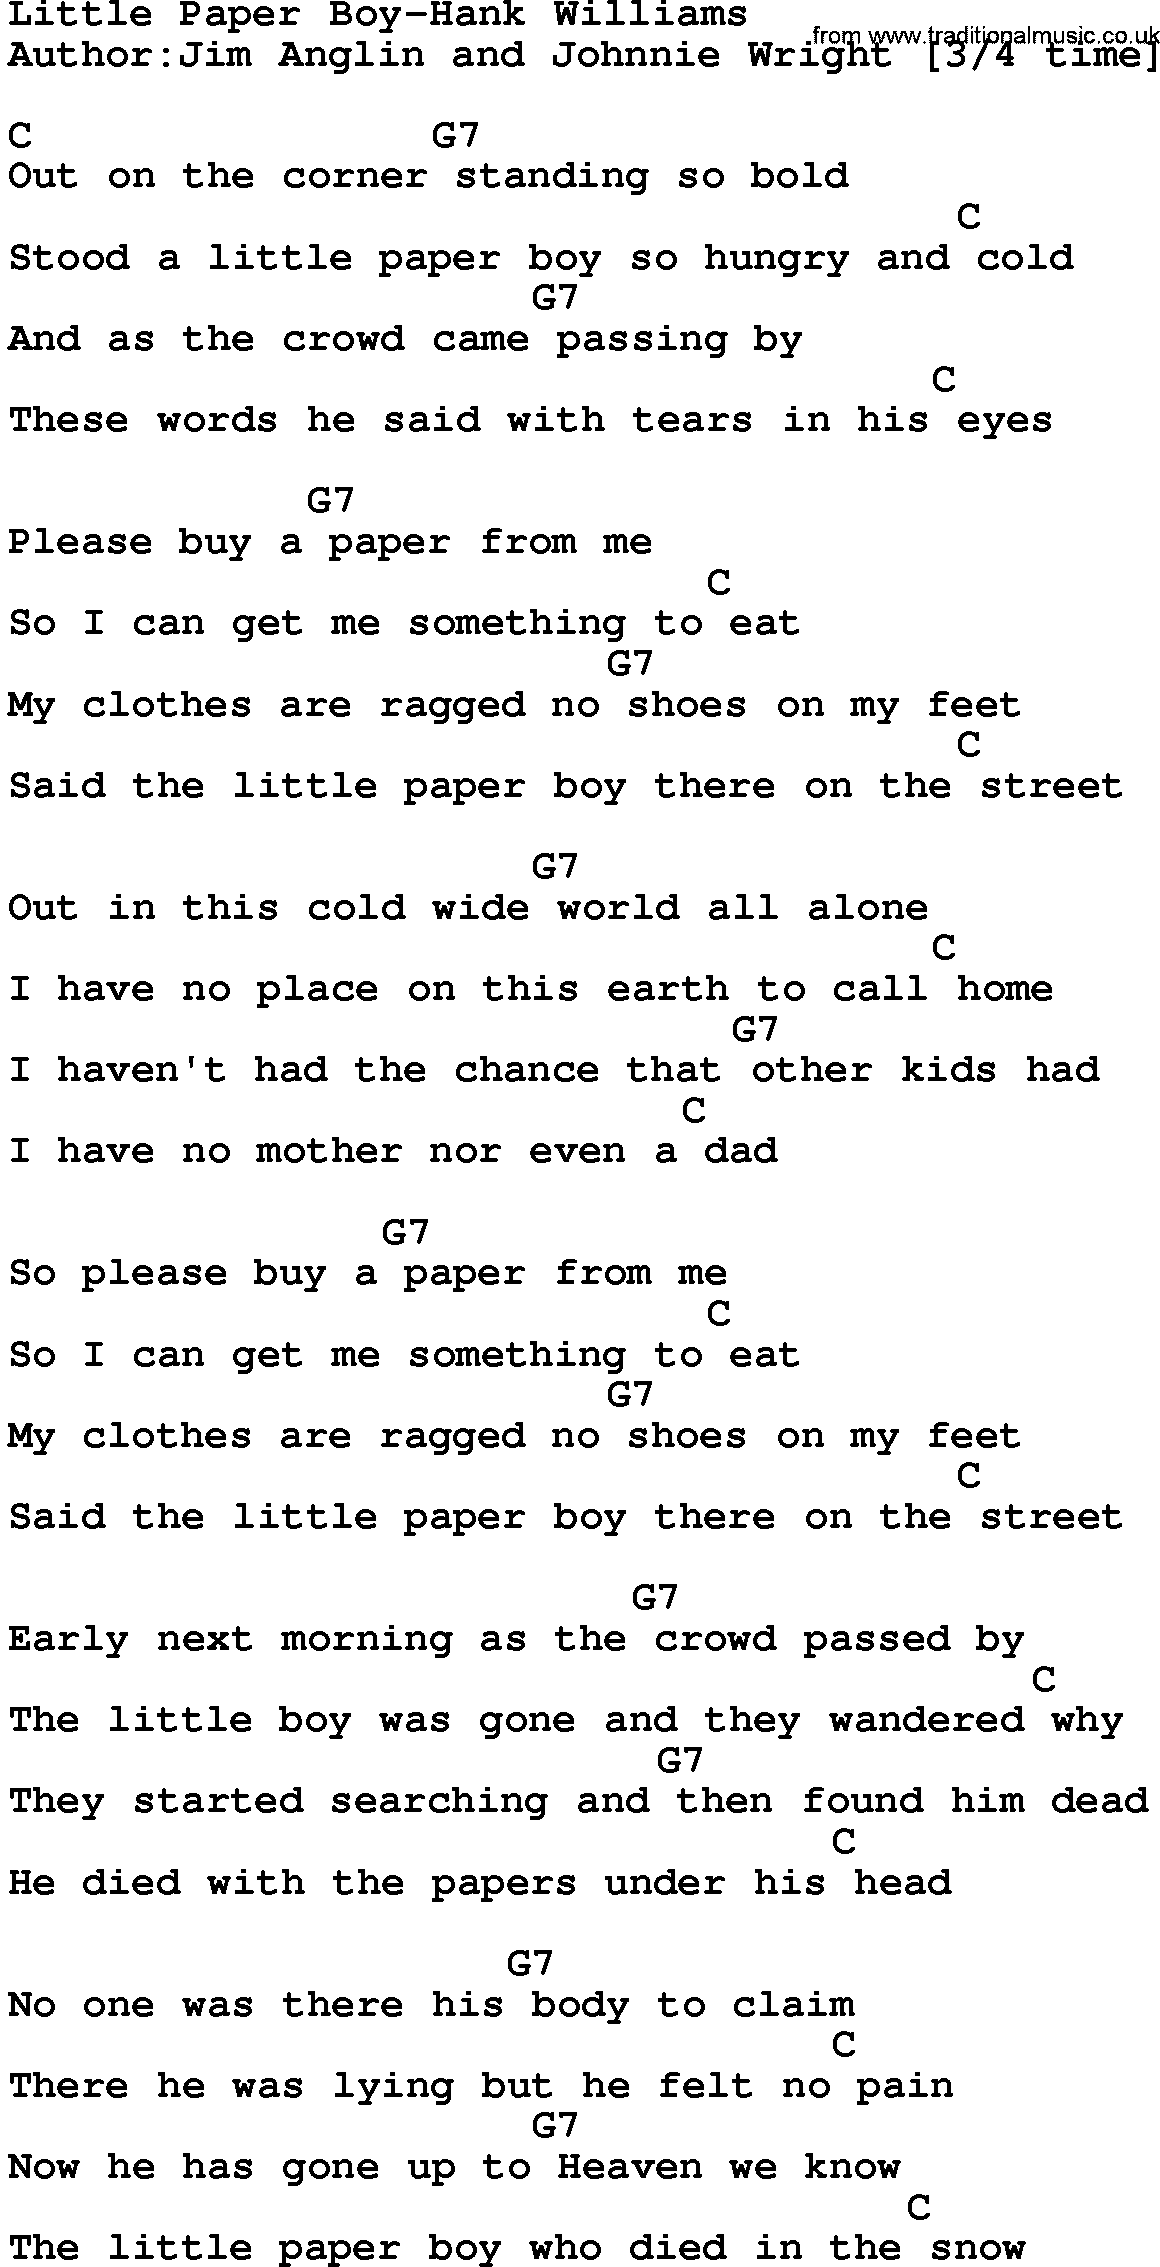 Country music song: Little Paper Boy-Hank Williams lyrics and chords